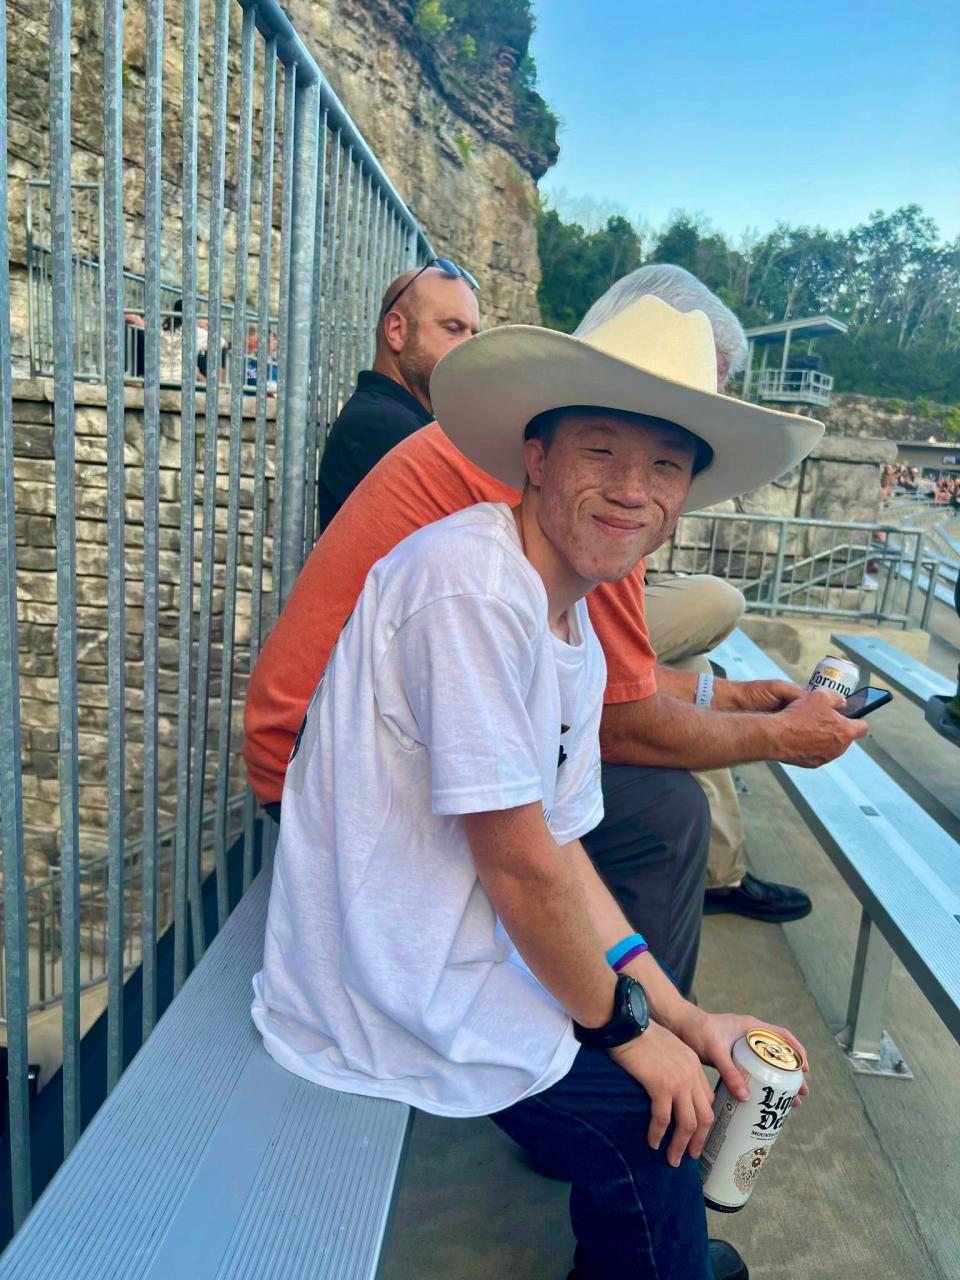 Will Spiess attends a Dwight Yoakam concert, one of his favorite musical artists, which also included bands ranging from Garth Brooks to AC/DC.